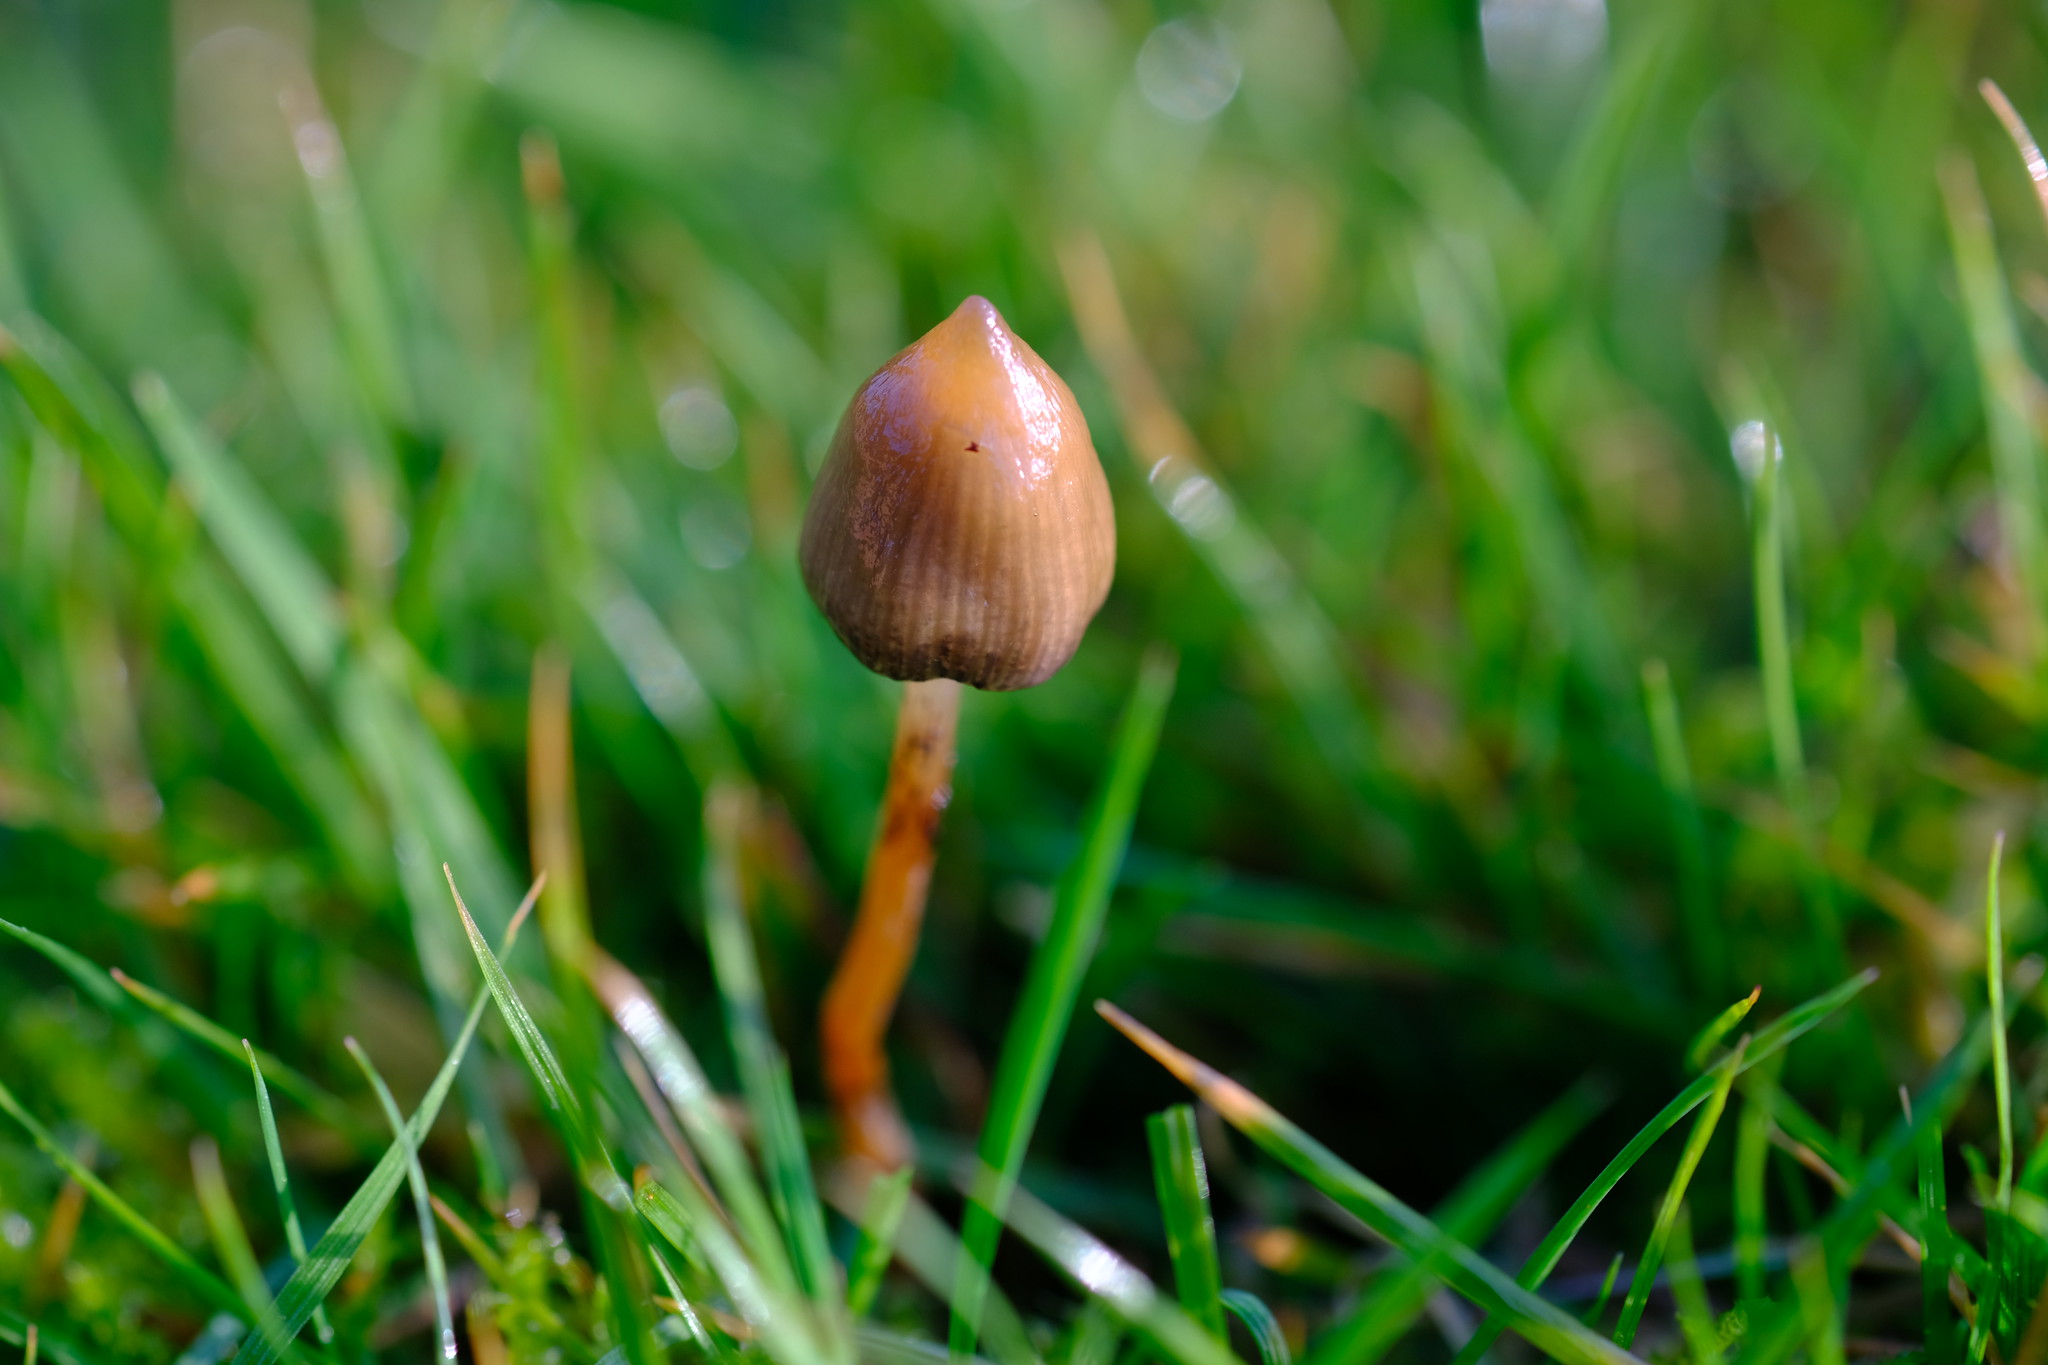 Why are people more interested in magic mushrooms?